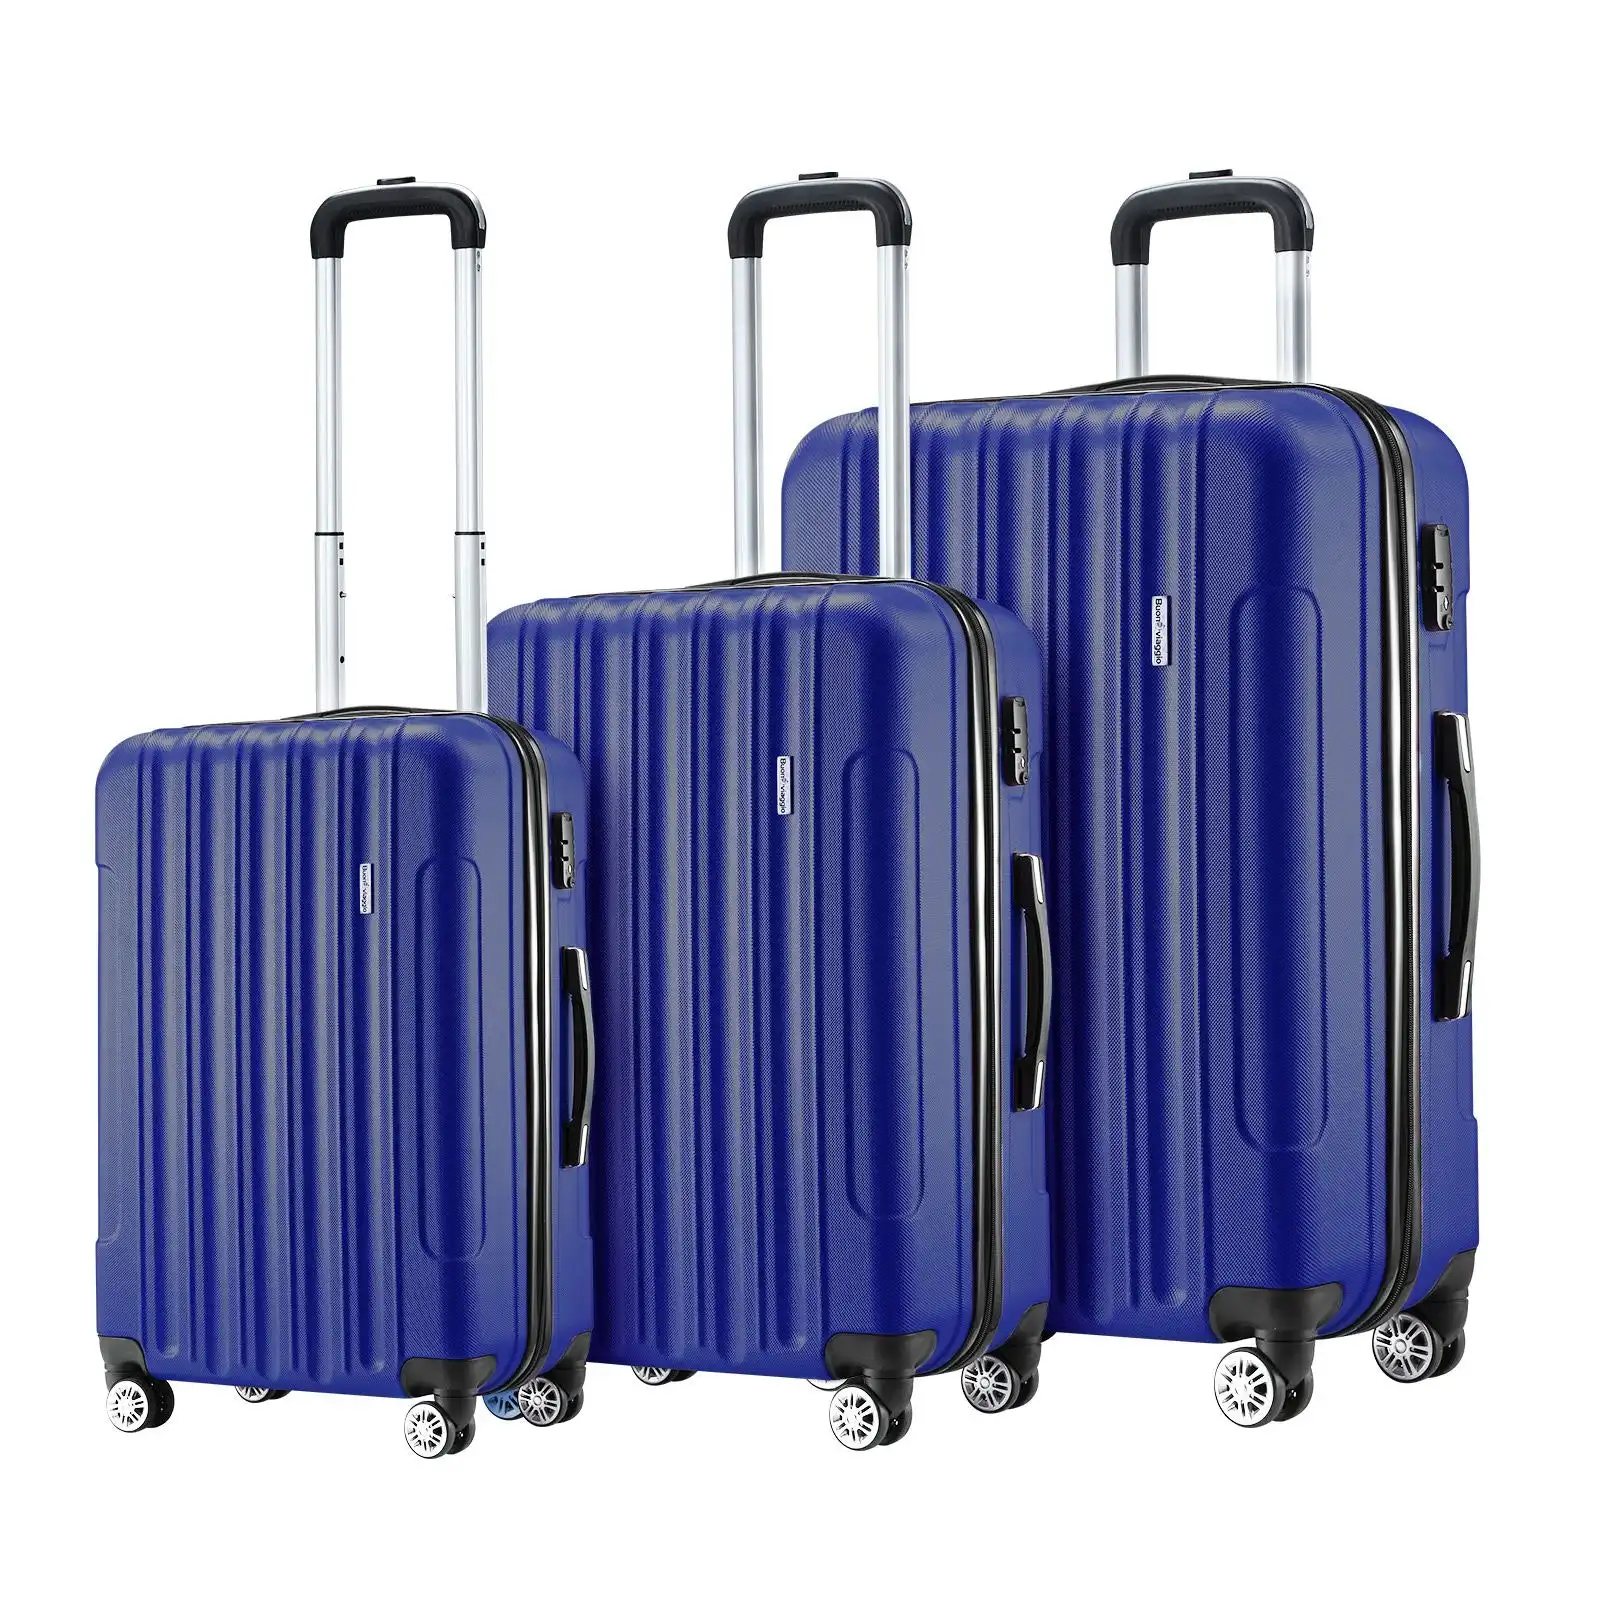 Buon Viaggio 3PCS Luggage Set Hard Travel Suitcases Carry On Lightweight Trolley with TSA Lock 2 Covers Royal Blue